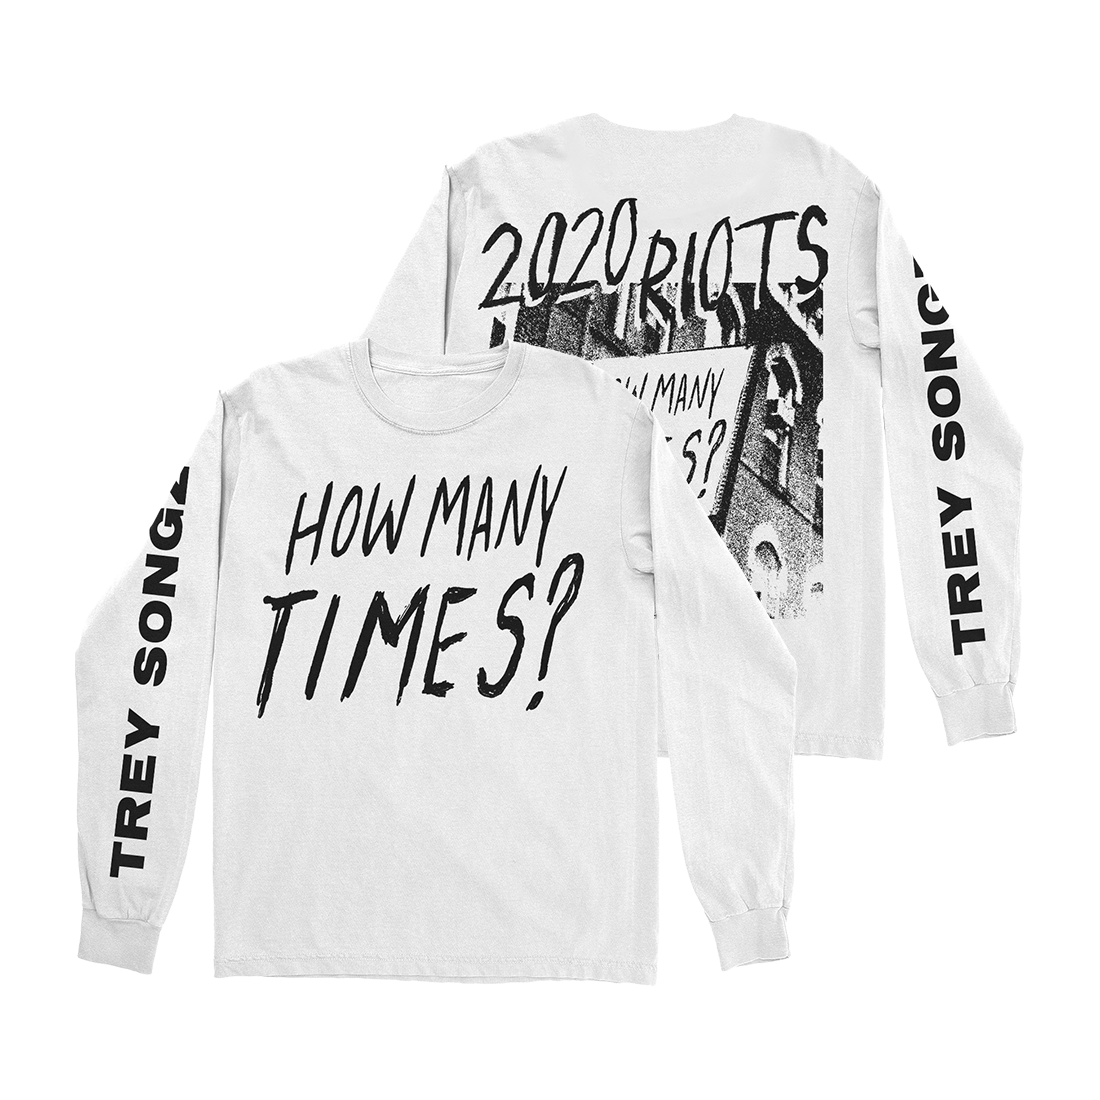 2020 Riots White Long Sleeve T-Shirt (M) | Trey Songz Official Store